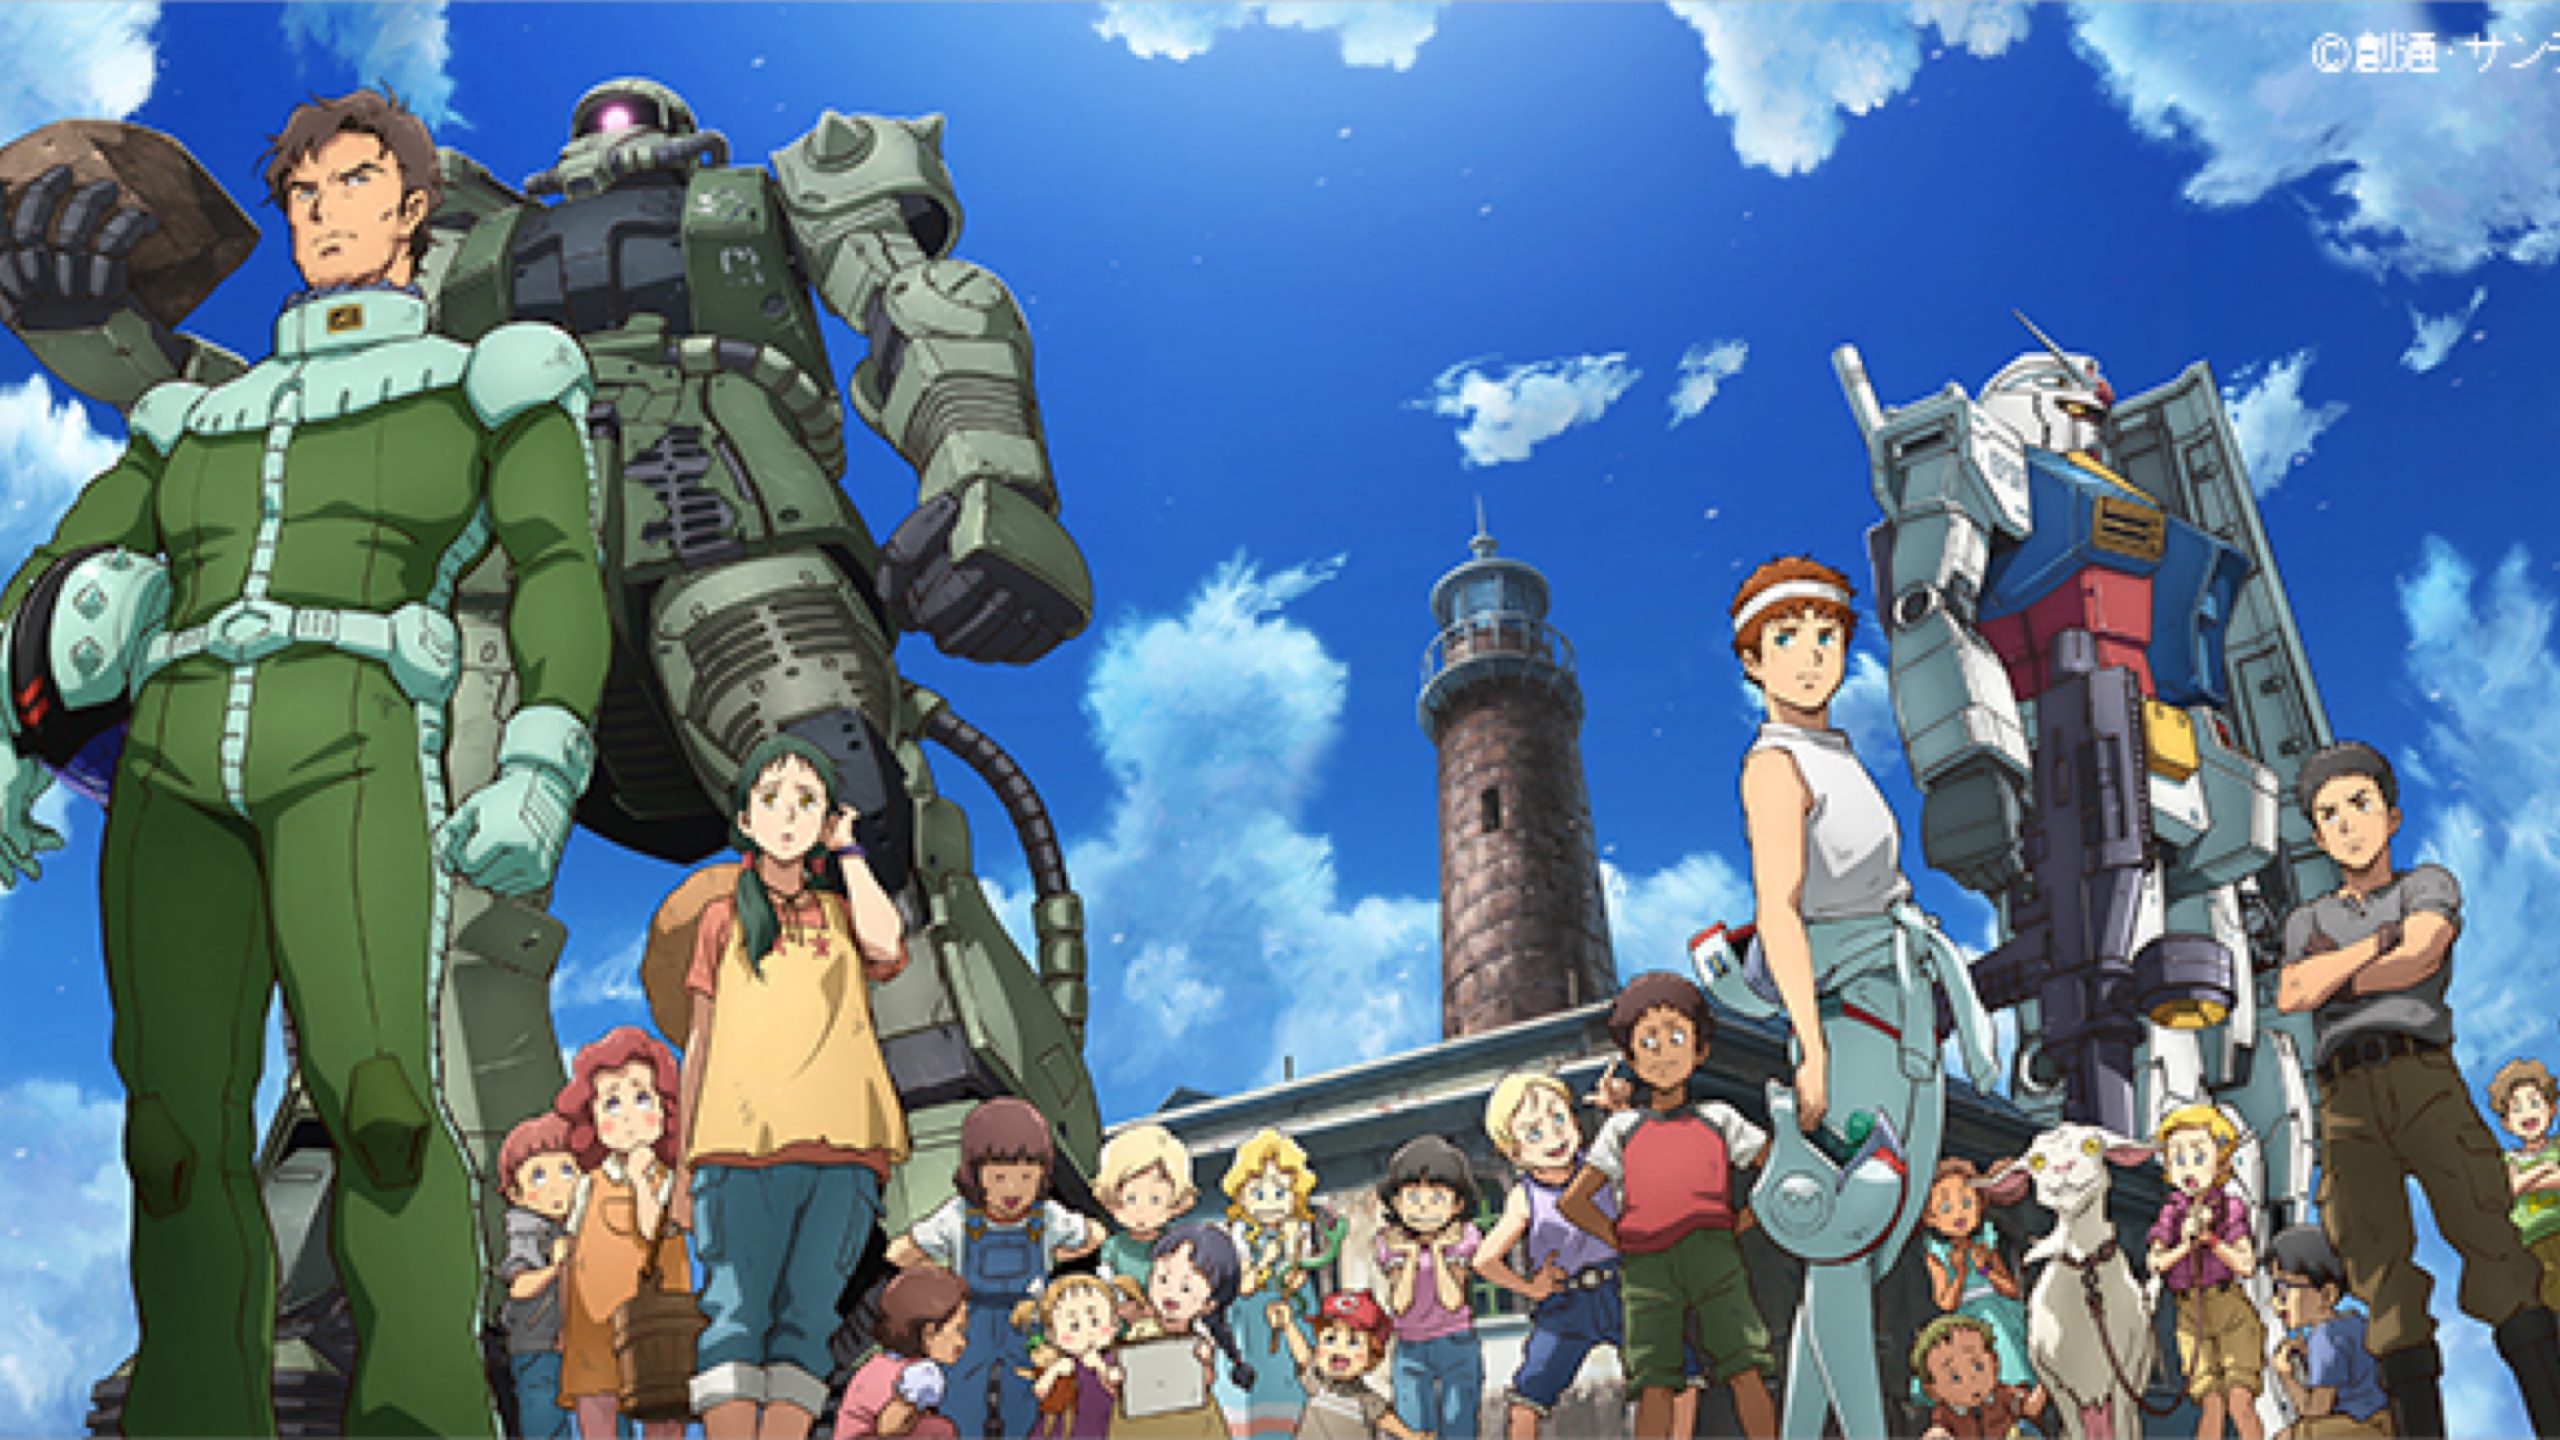 Mobile Suit Gundam: Requiem for Vengeance is set in the One Year War’s ...